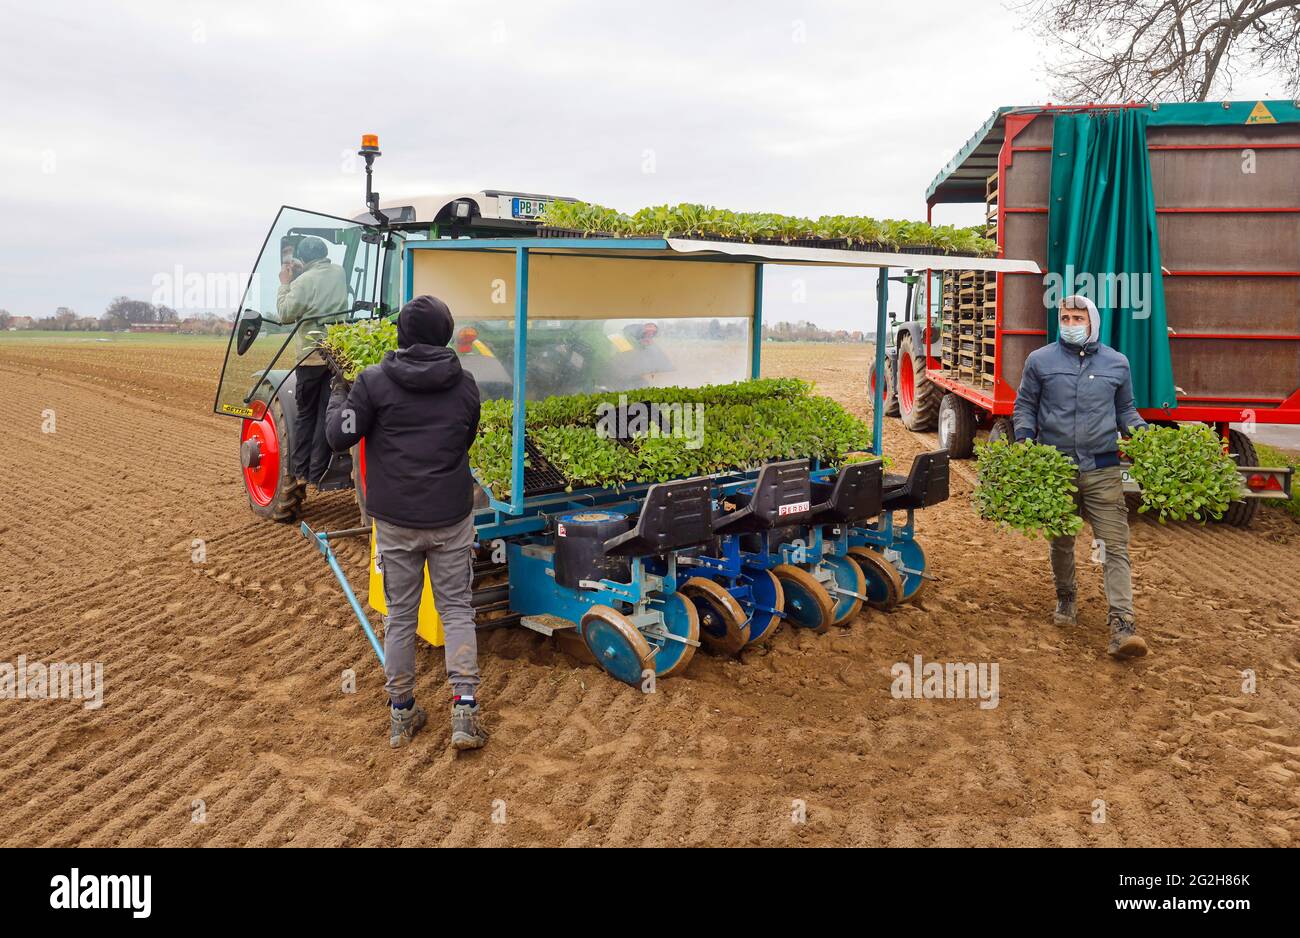 Welver, Soest district, Sauerland, North Rhine-Westphalia, Germany - vegetable cultivation, field workers on a planting machine put white cabbage plants in the freshly tilled field. Stock Photo